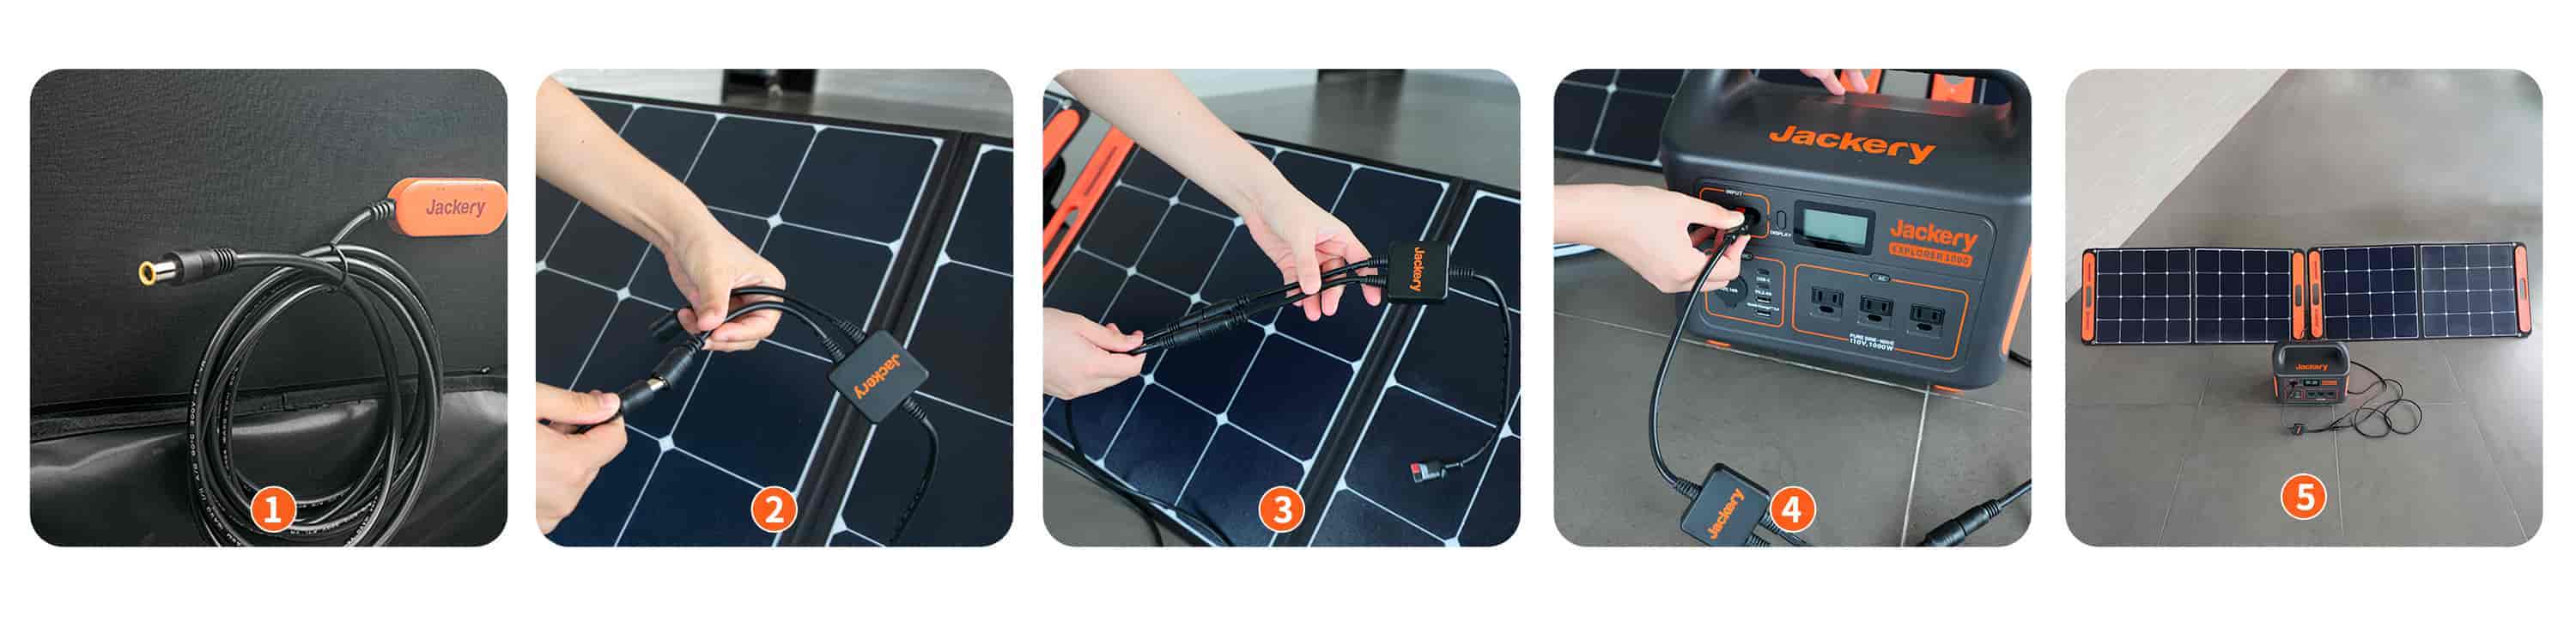 The steps to connect two SolarSaga 100W solar panels together with an adapter cable.